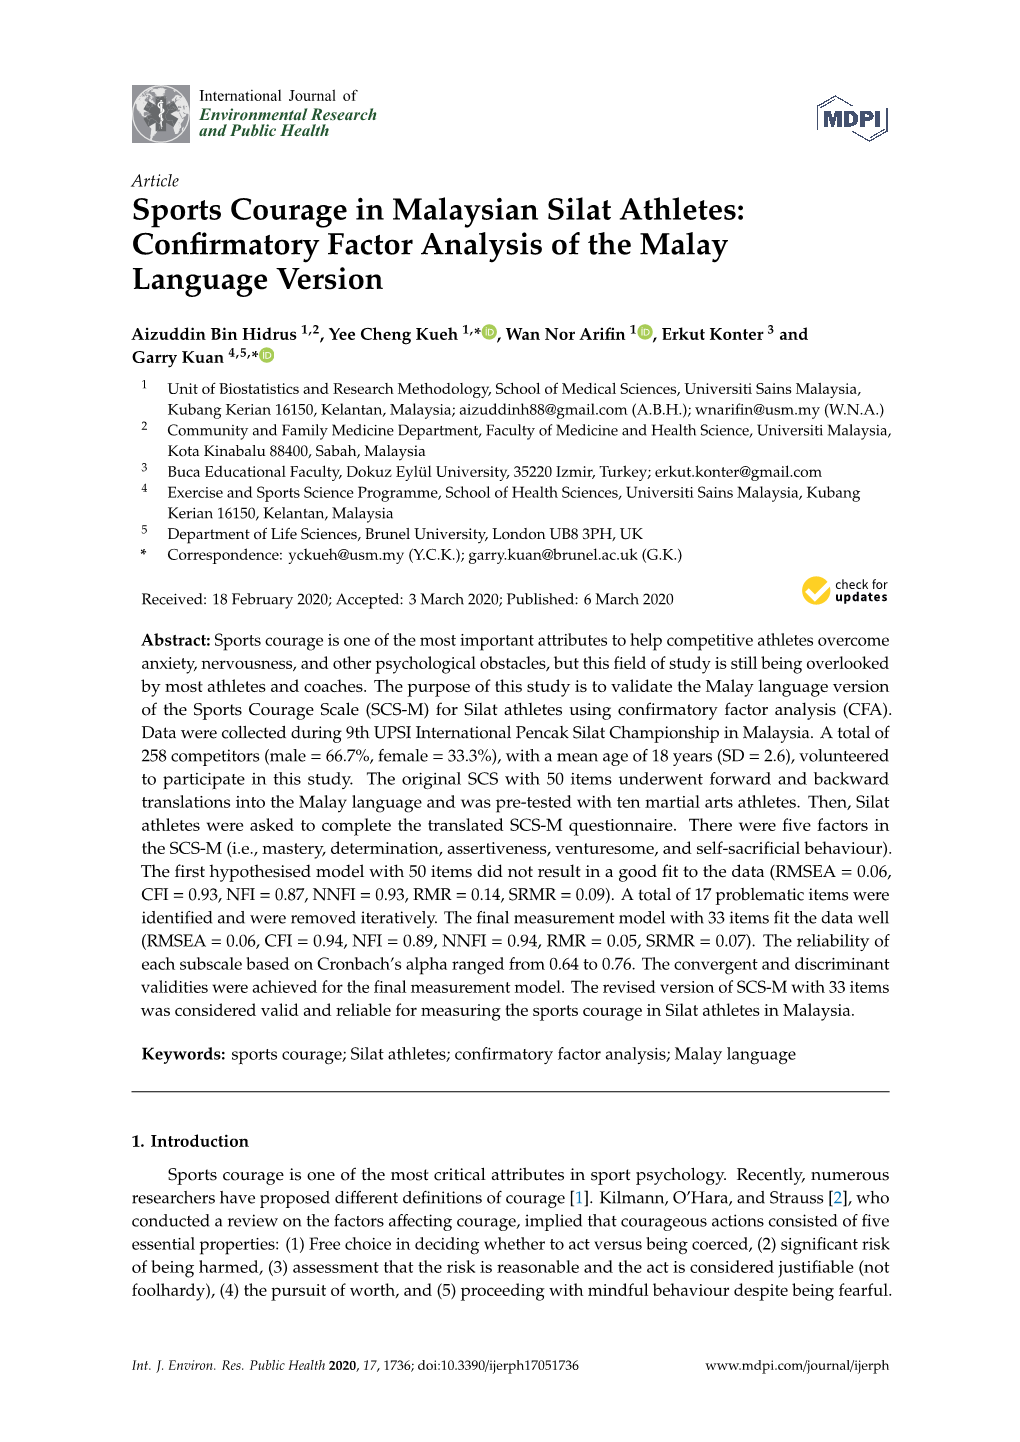 Sports Courage in Malaysian Silat Athletes: Conﬁrmatory Factor Analysis of the Malay Language Version